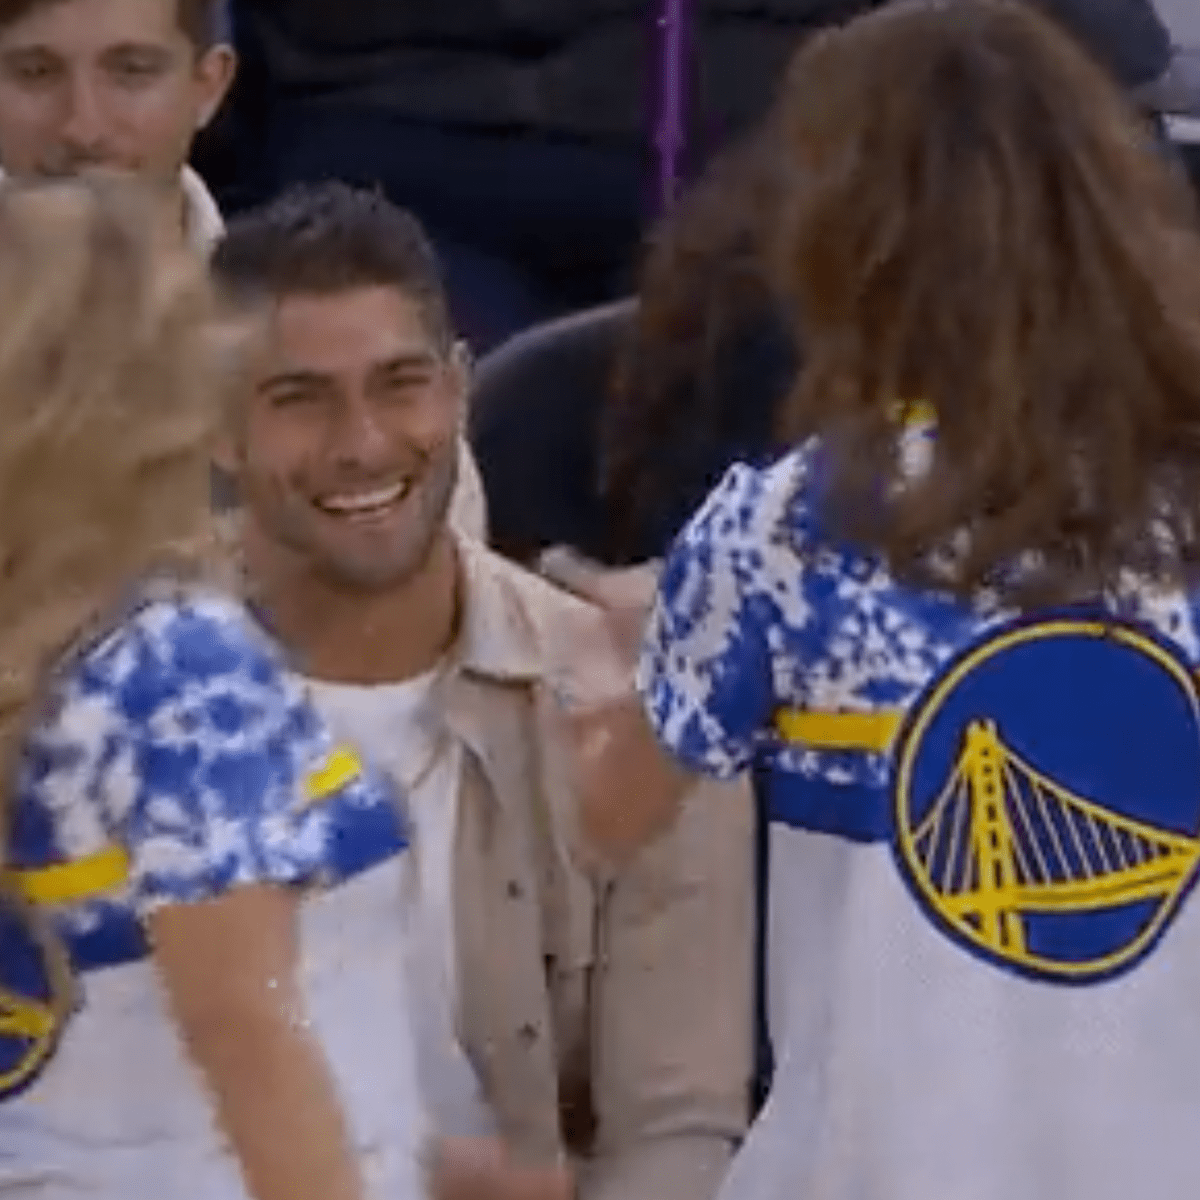 Video Of Jimmy Garoppolo, Warriors Dancers Is Going Viral - The Spun:  What's Trending In The Sports World Today